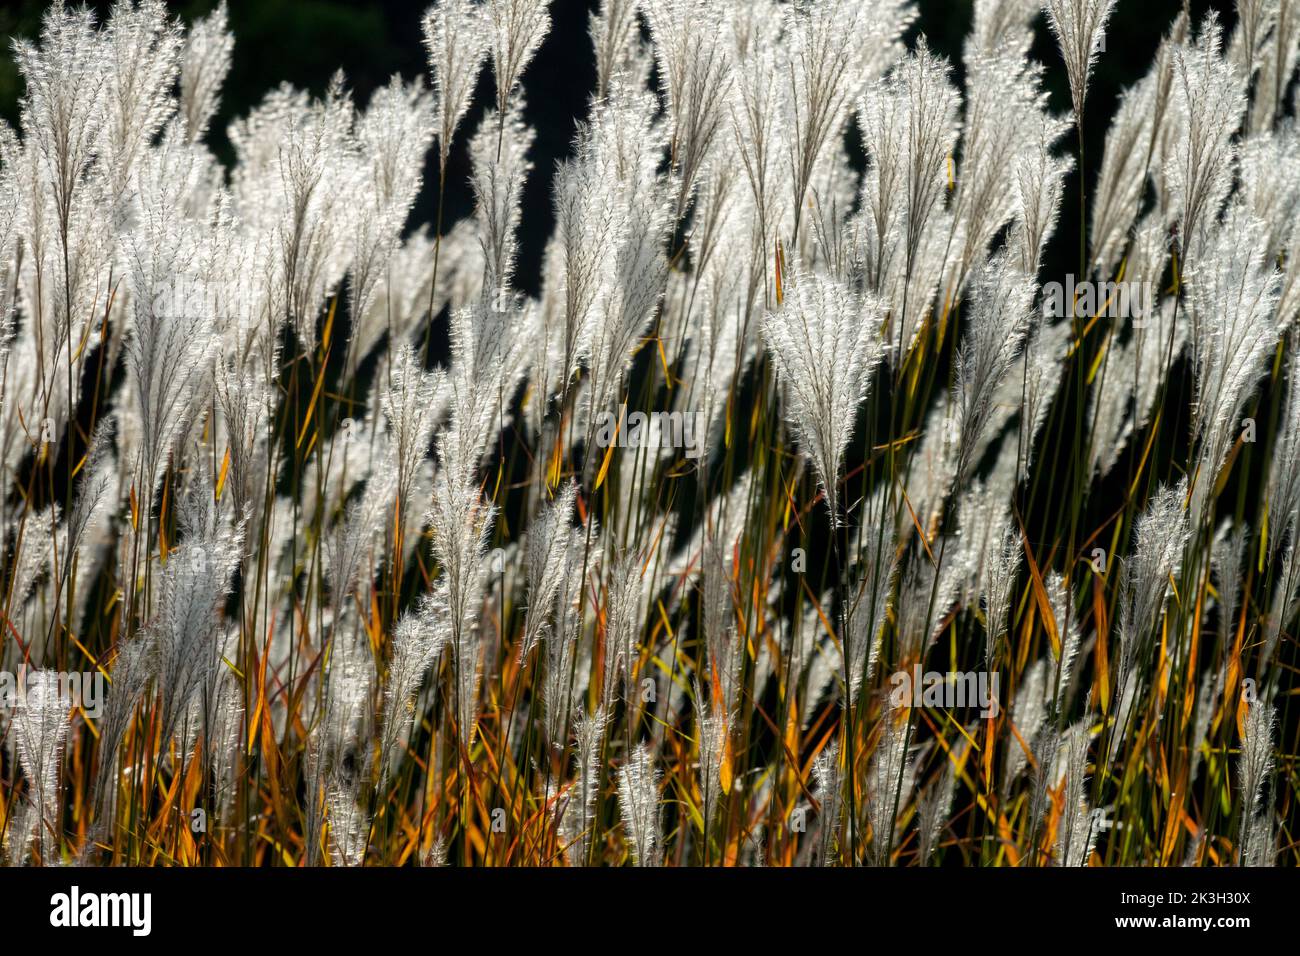 Autumn Red Miscanthus purpurascens Feathery seed-heads, Ornamental, Grass Panicles Flame Grass, Miscanthus sinensis, Perennial in sunshine Seedheads Stock Photo